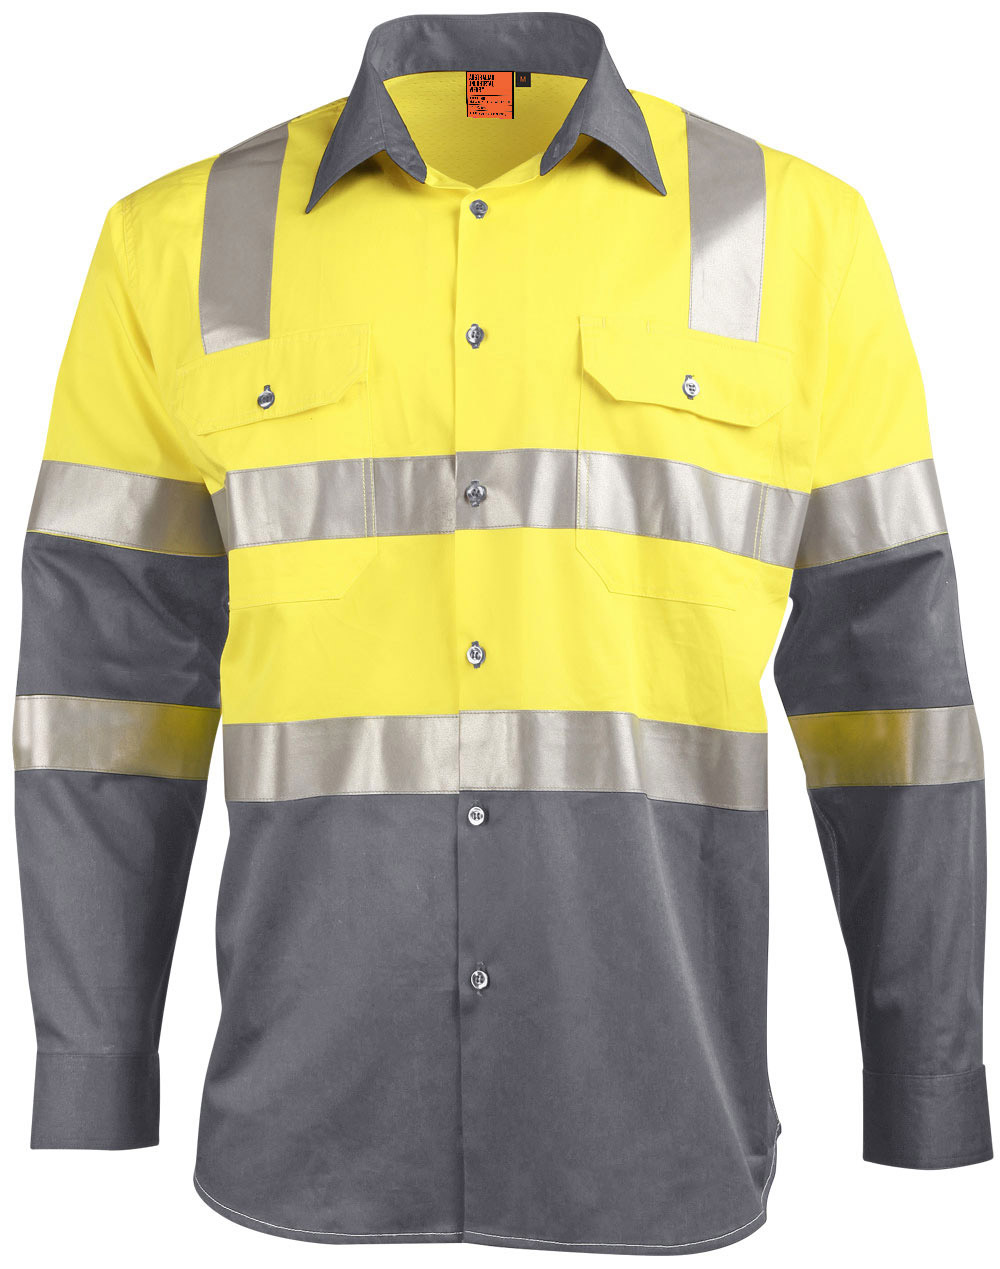 SW70 Biomotion Day/Night Light Weight Safety Shirt With X Back Tape Configuration